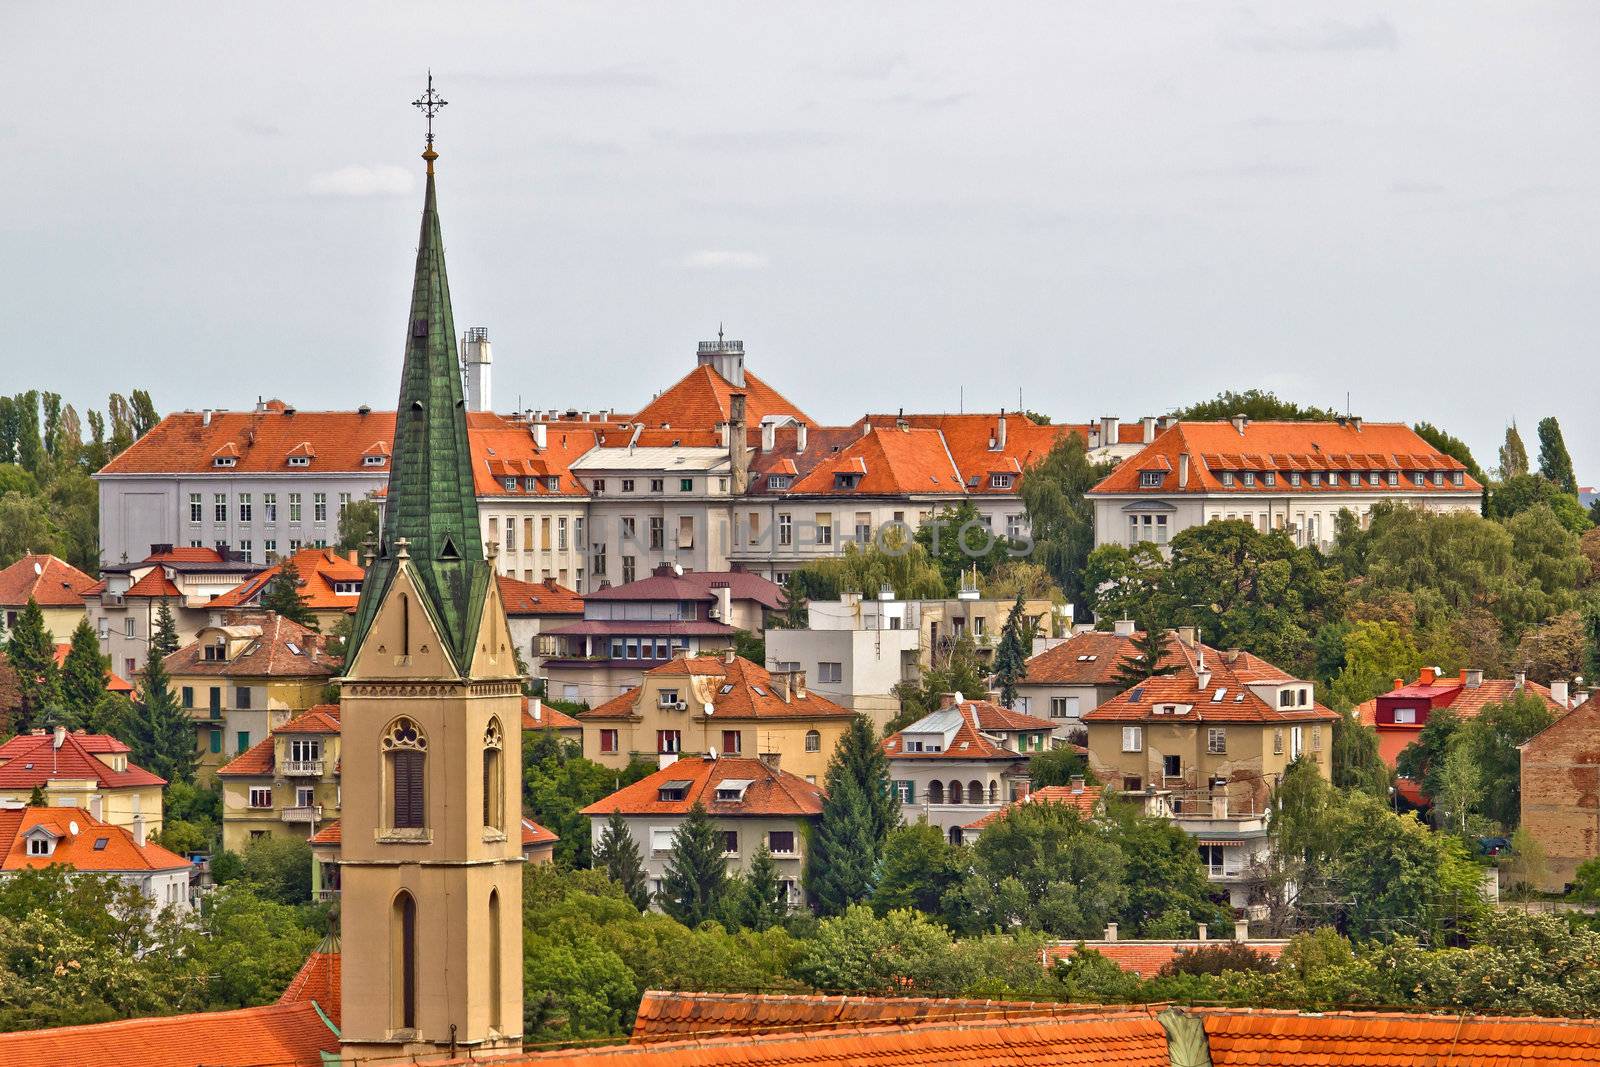 Zagreb rooftops and church tower, croatia